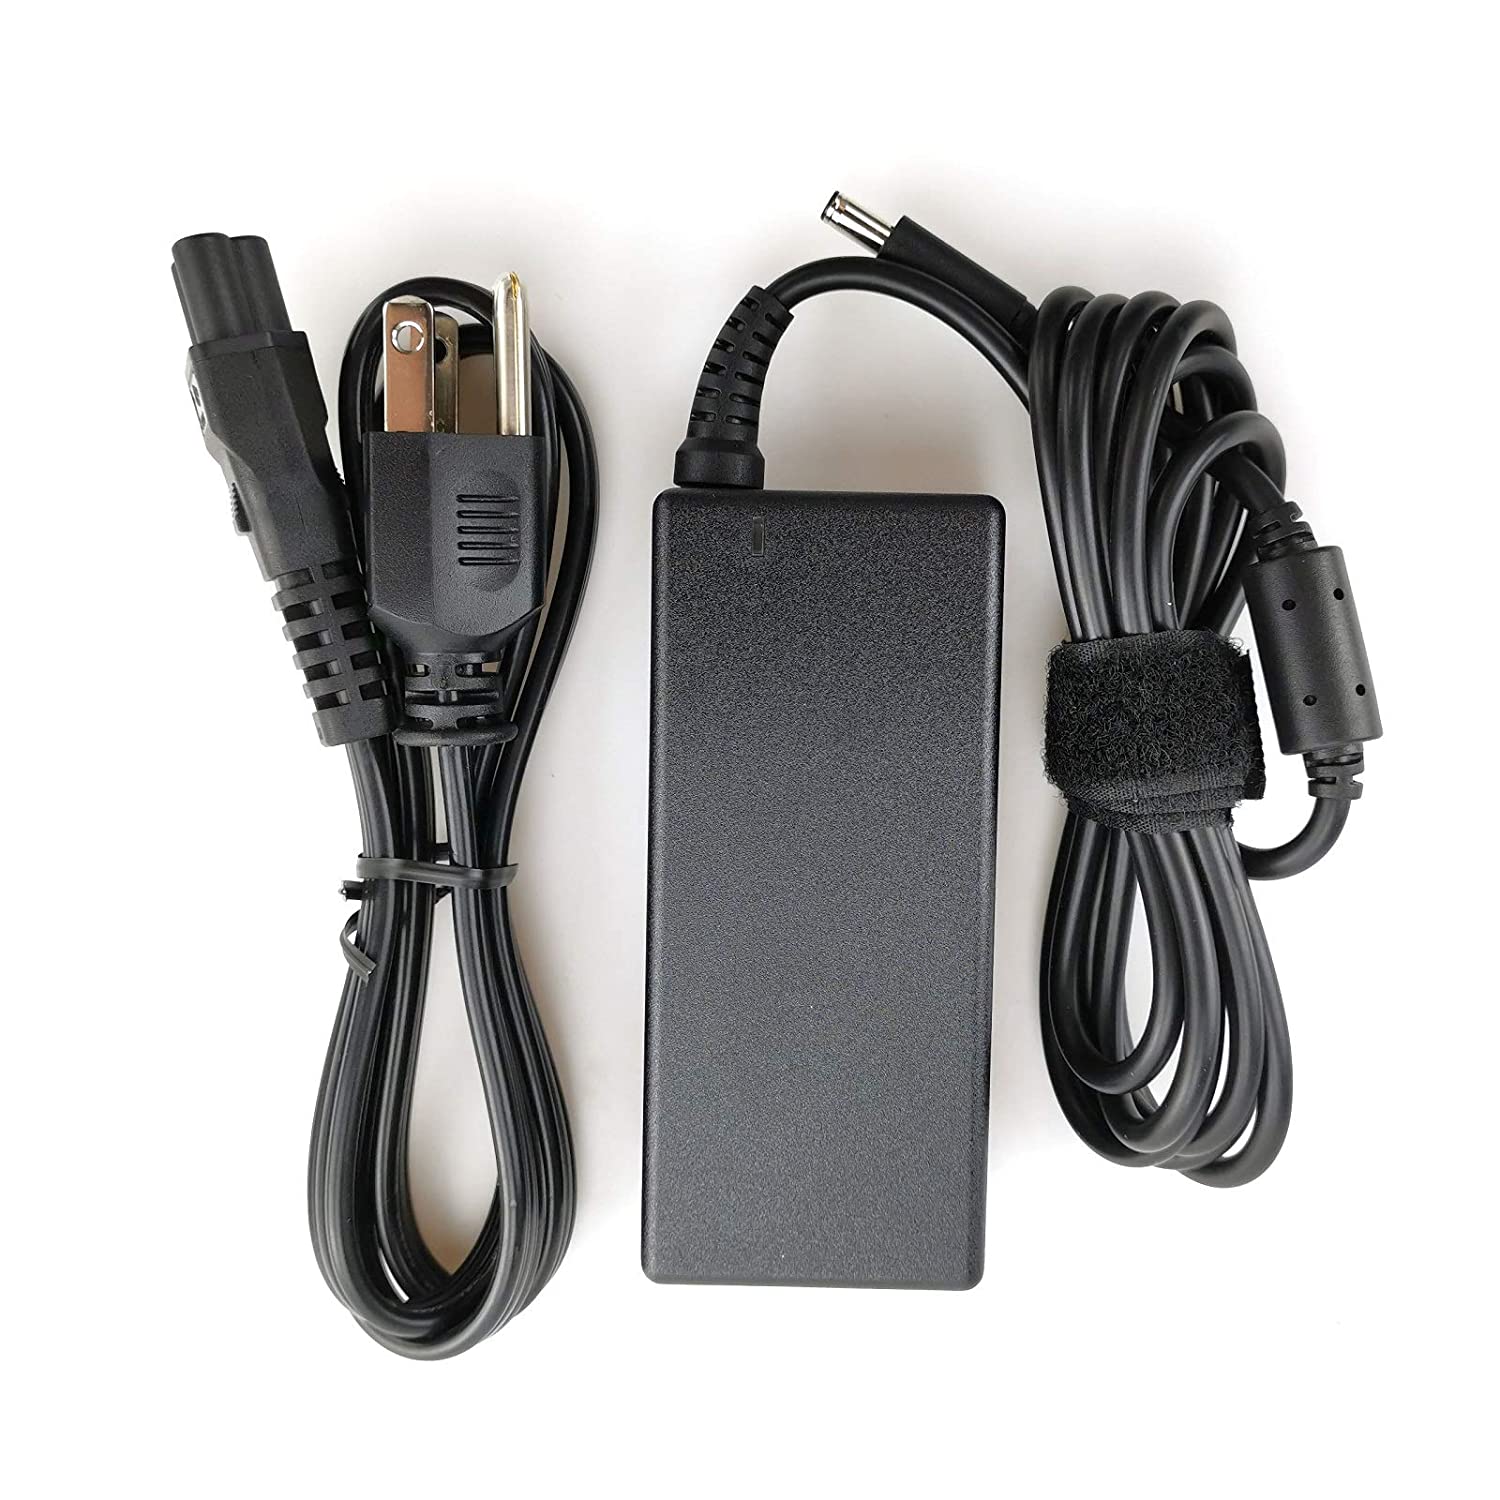 New Dell Original Inspiron Laptop Charger 65W watt 4.5mm tip AC Power Adapter(Power Supply) with Power Cord for Inspiron 13 14 15,3000 5000 7000 Series,5558 5755 3147 7348-2in1 5555 5559,0G6j41 0MGJN - image 3 of 6